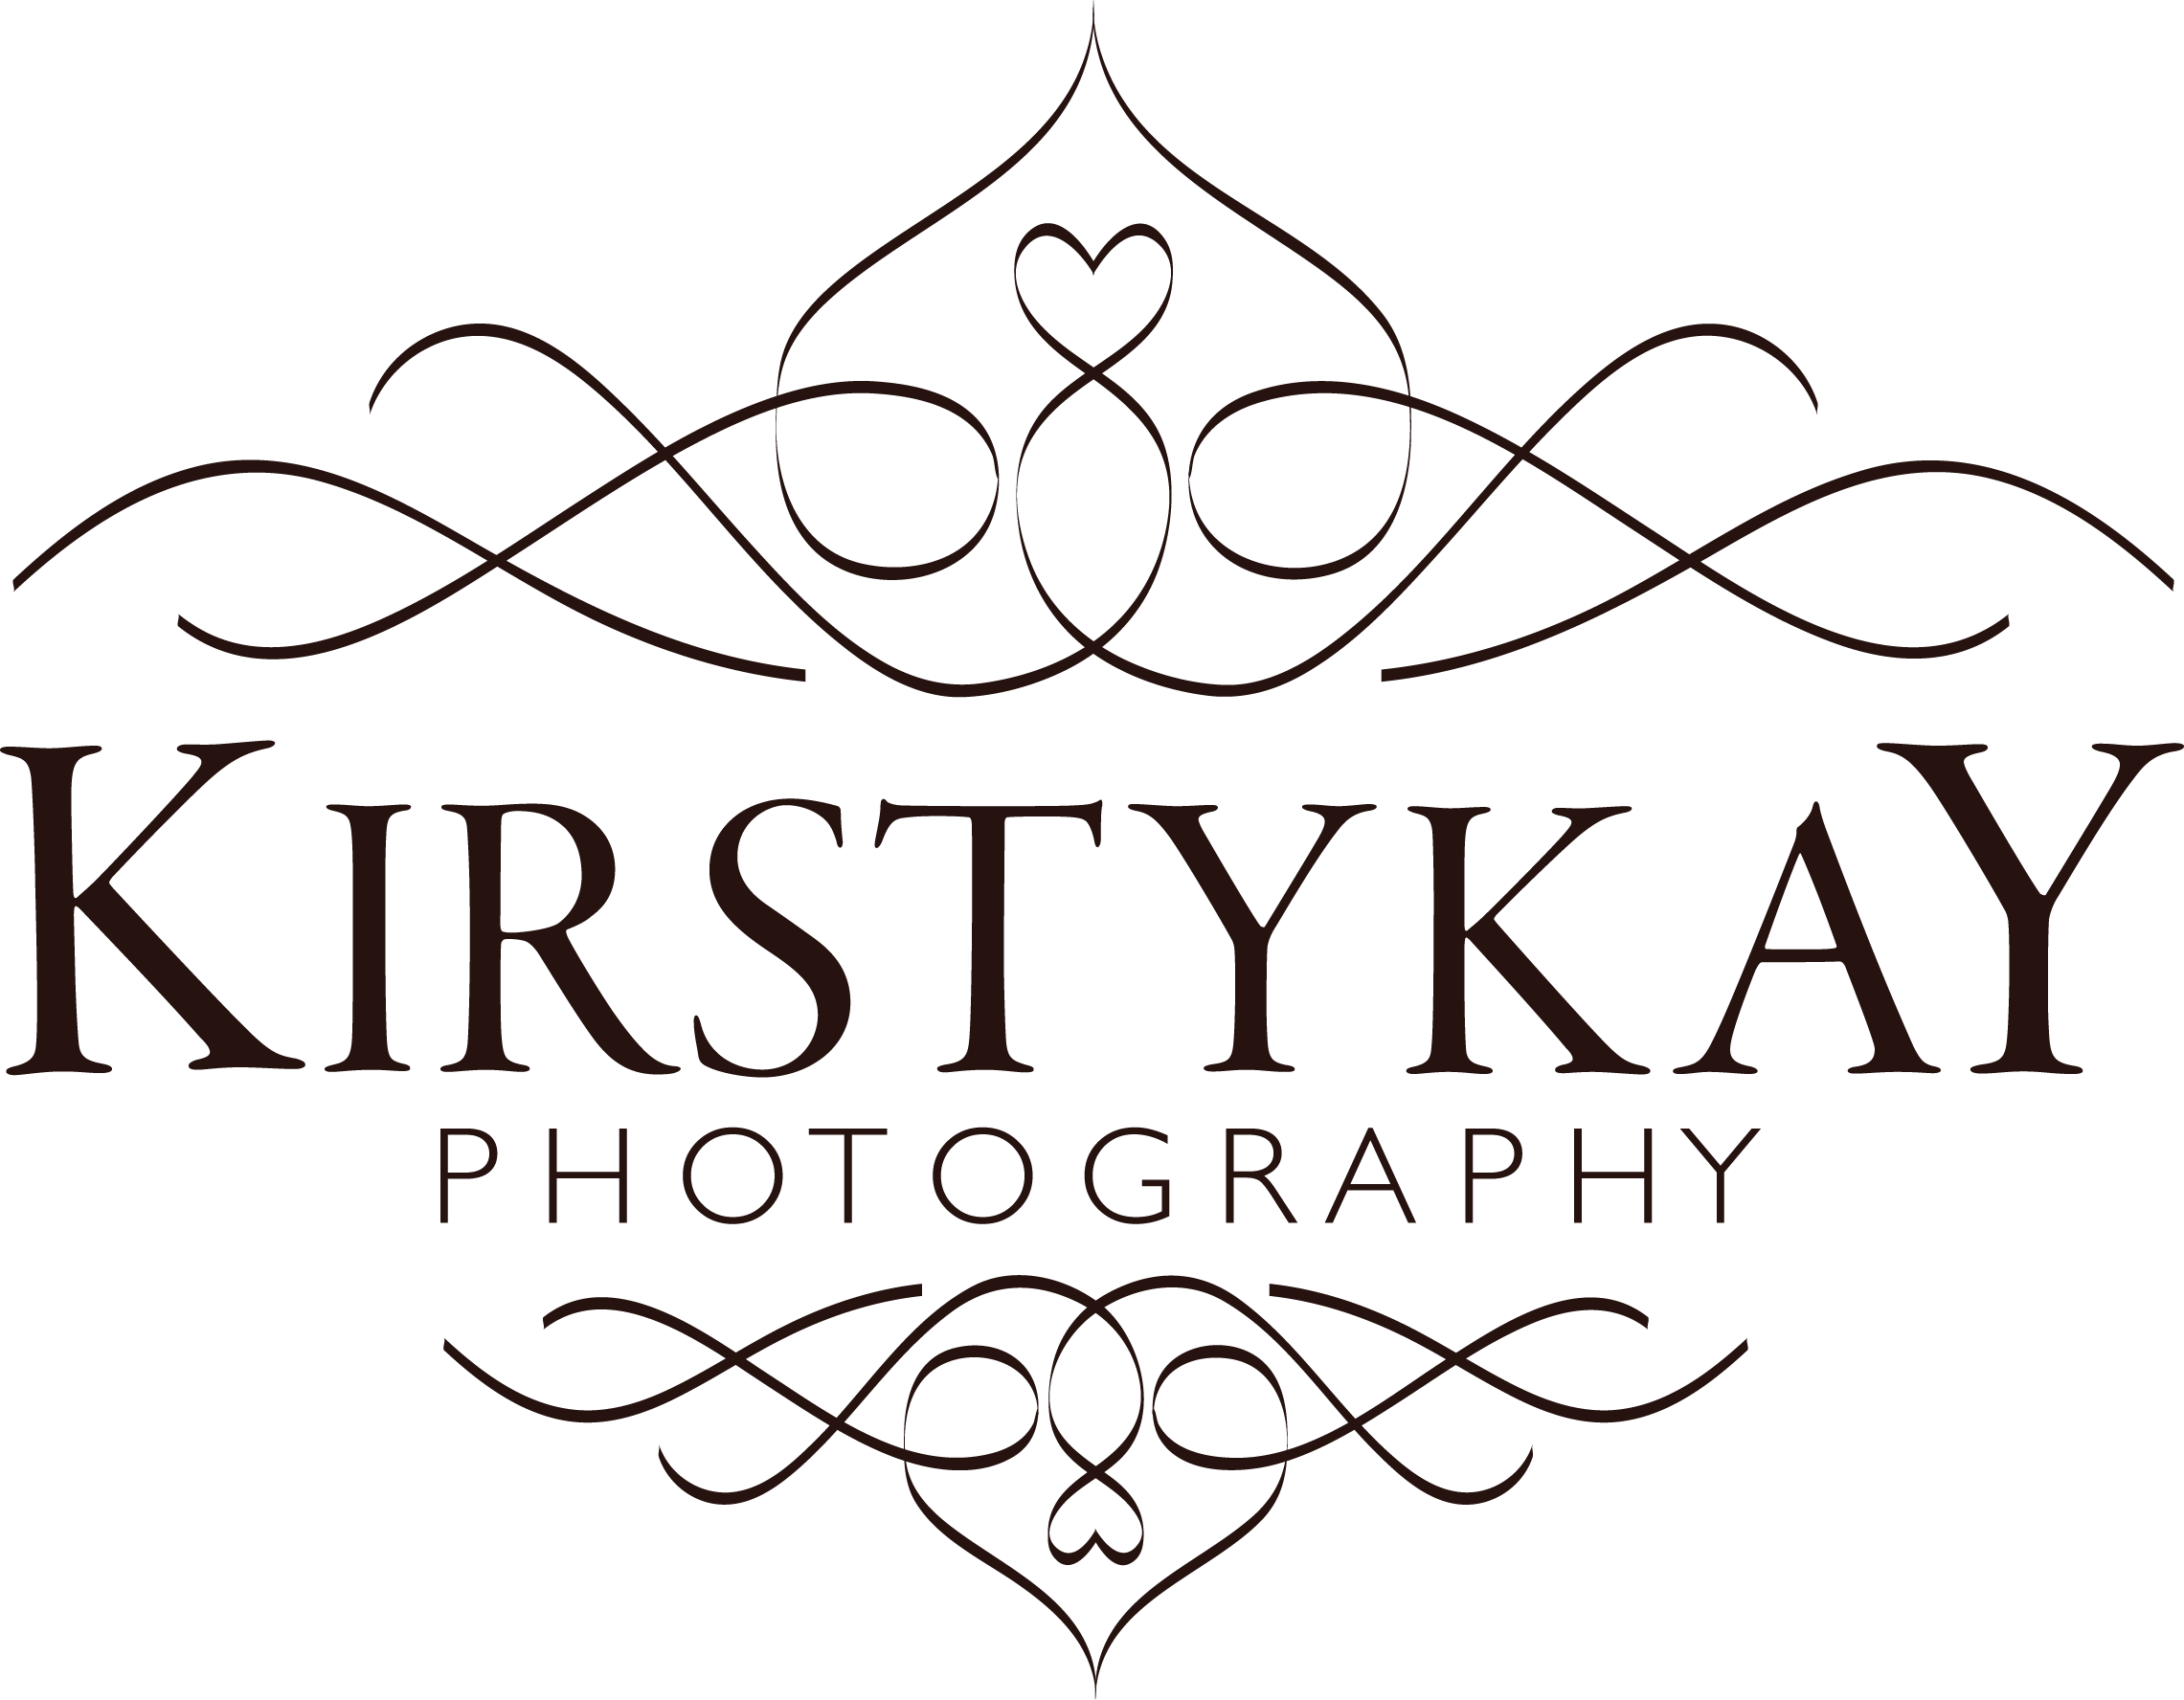 Kirsty Kay Photography